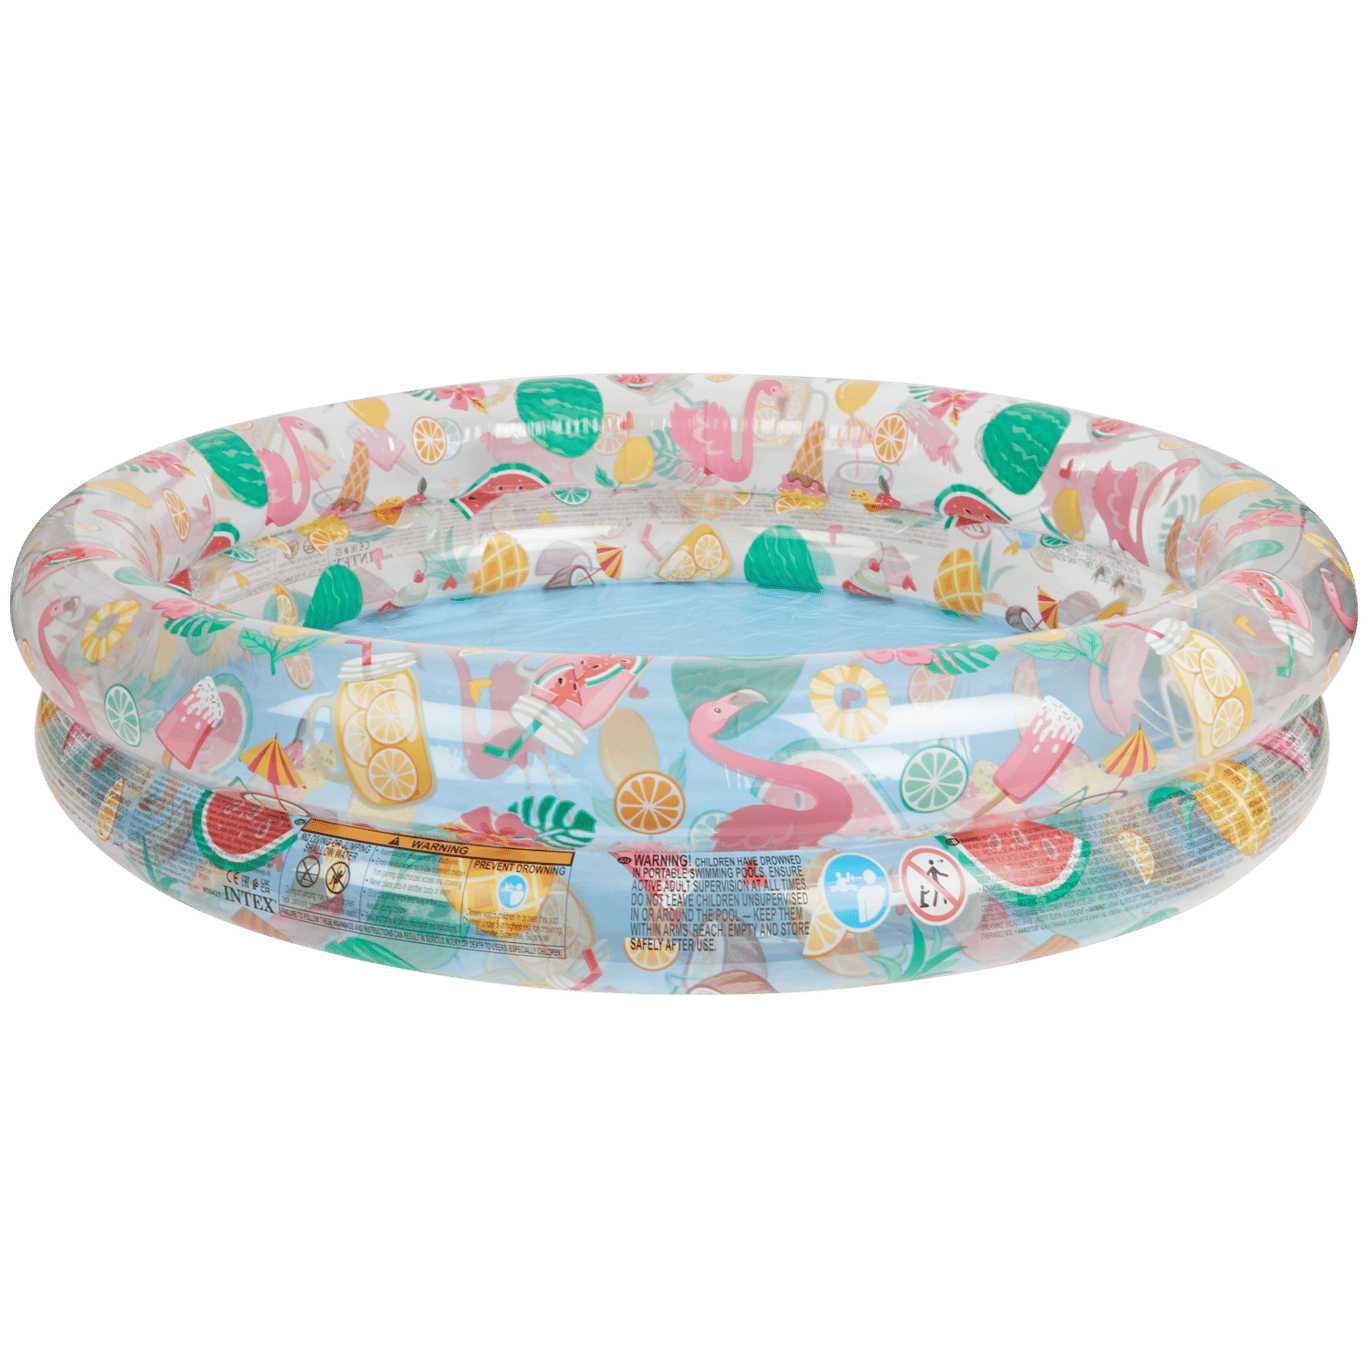 Piscine gonflable Intex